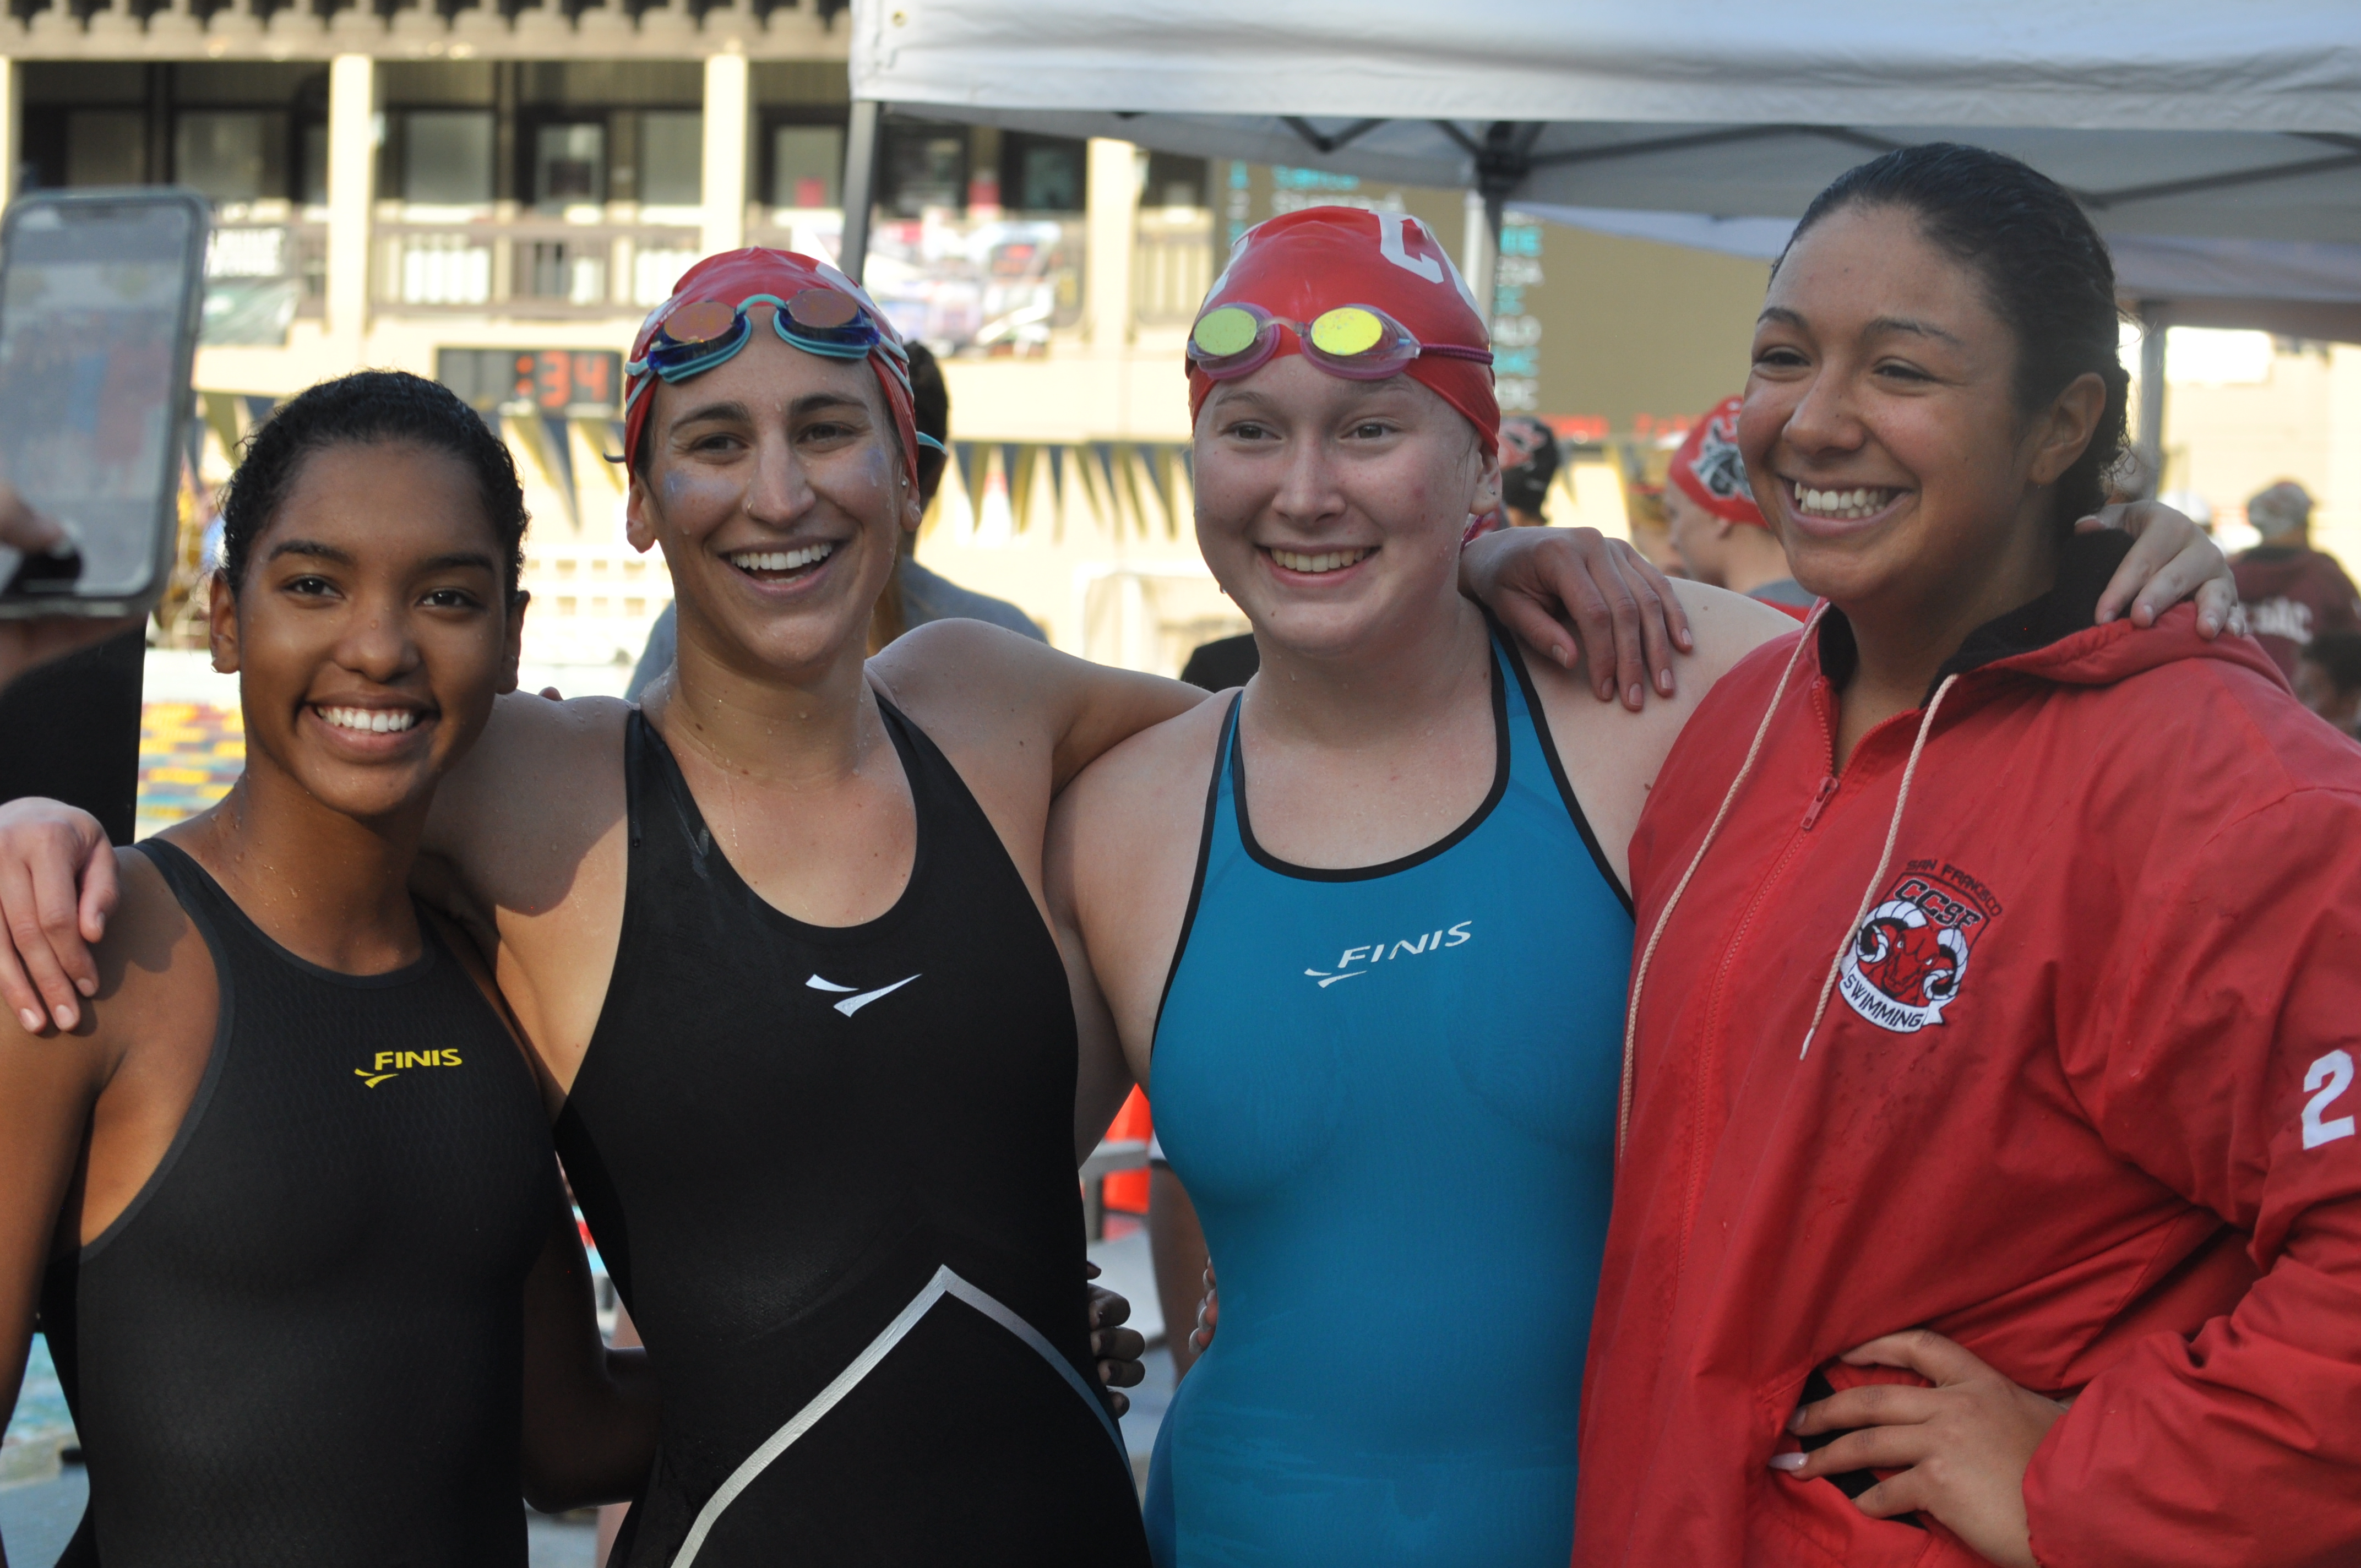 Carla Sakia Hovde, left to right, Bianca Taylor, Keelin Alspaugh, and Julia Lane after competing in the 800 Free Relay at De Anza on May 4, 2018. Photo by Peter J. Suter/The Guardsman.